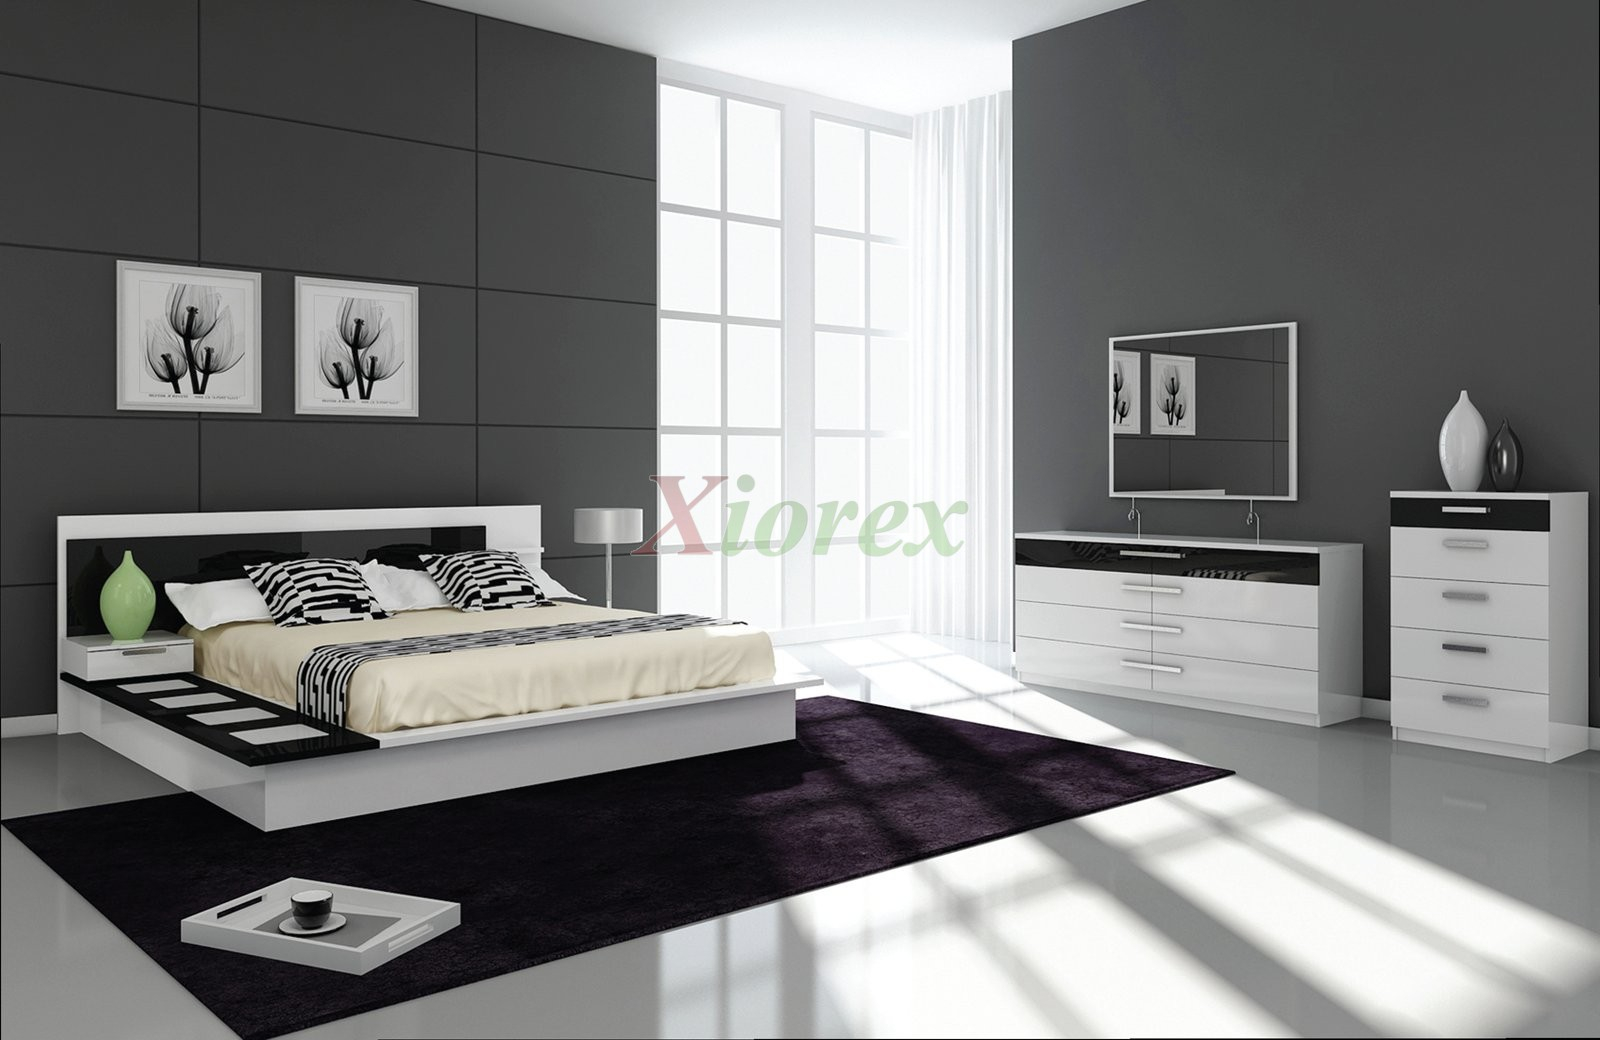 Draco Black And White Contemporary Bedroom Furniture Sets Xiorex throughout proportions 1600 X 1040